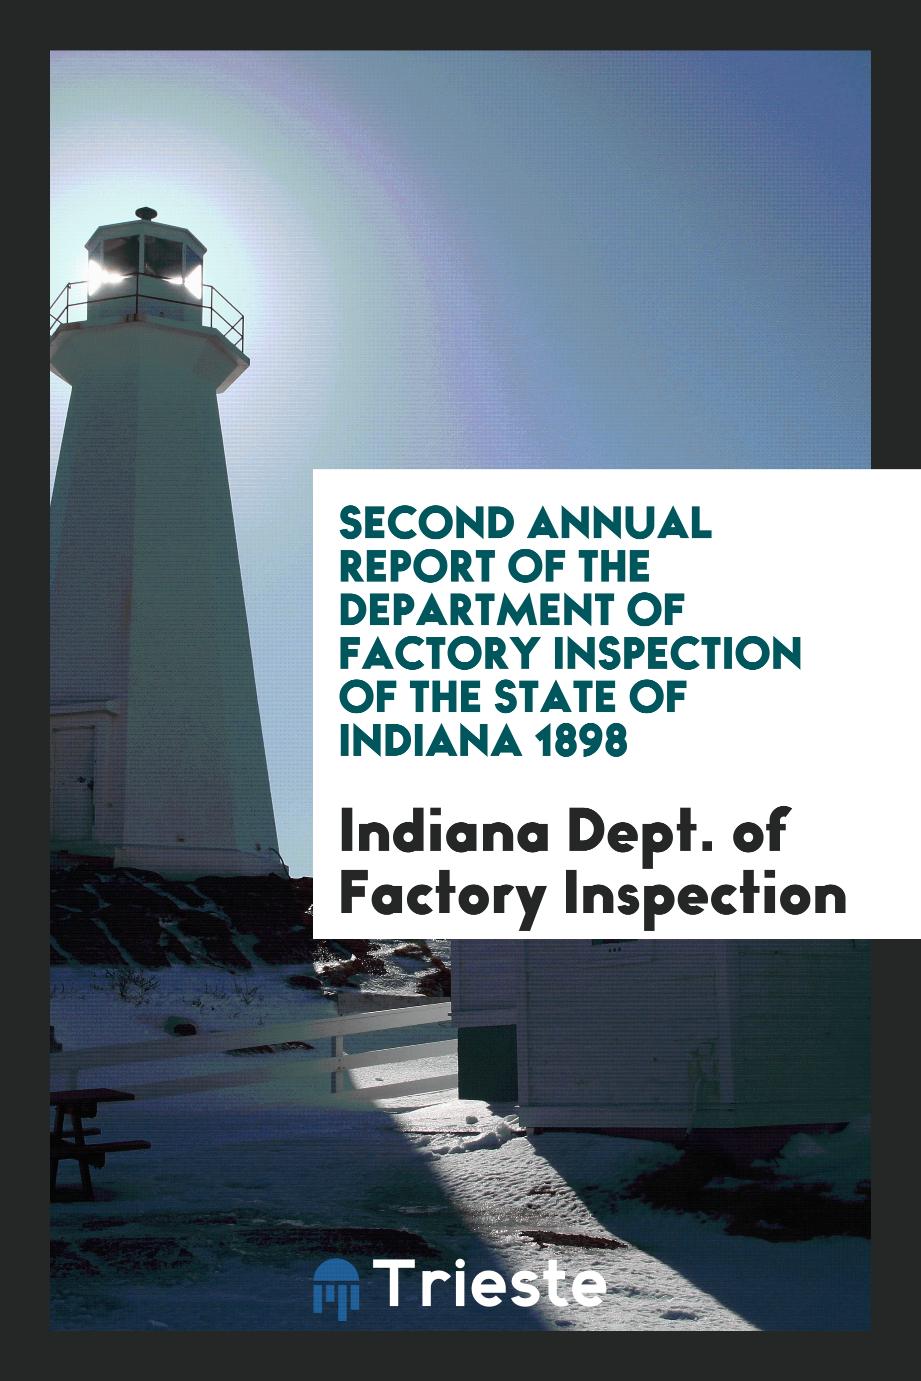 Second Annual Report of the Department of Factory Inspection of the State of Indiana 1898